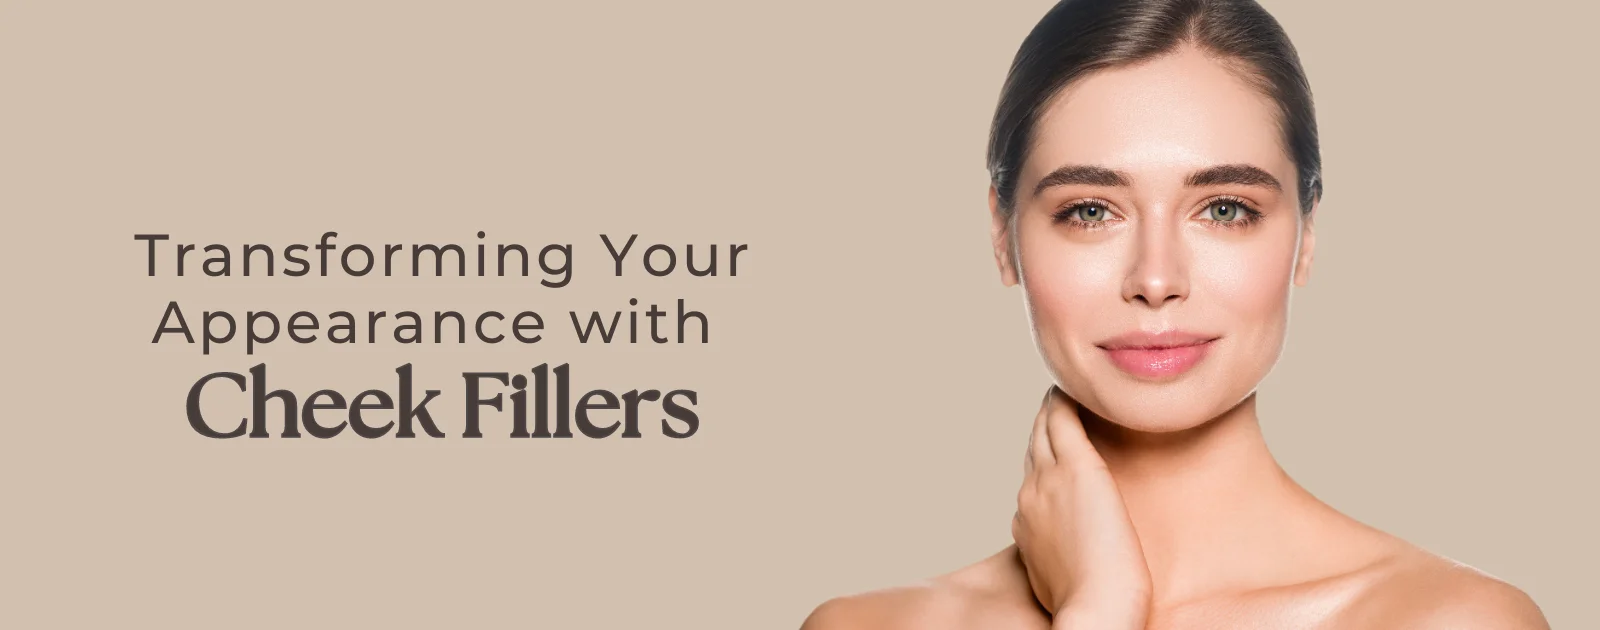 Reintroduce Yourself Transforming Your Appearance with Cheek Fillers